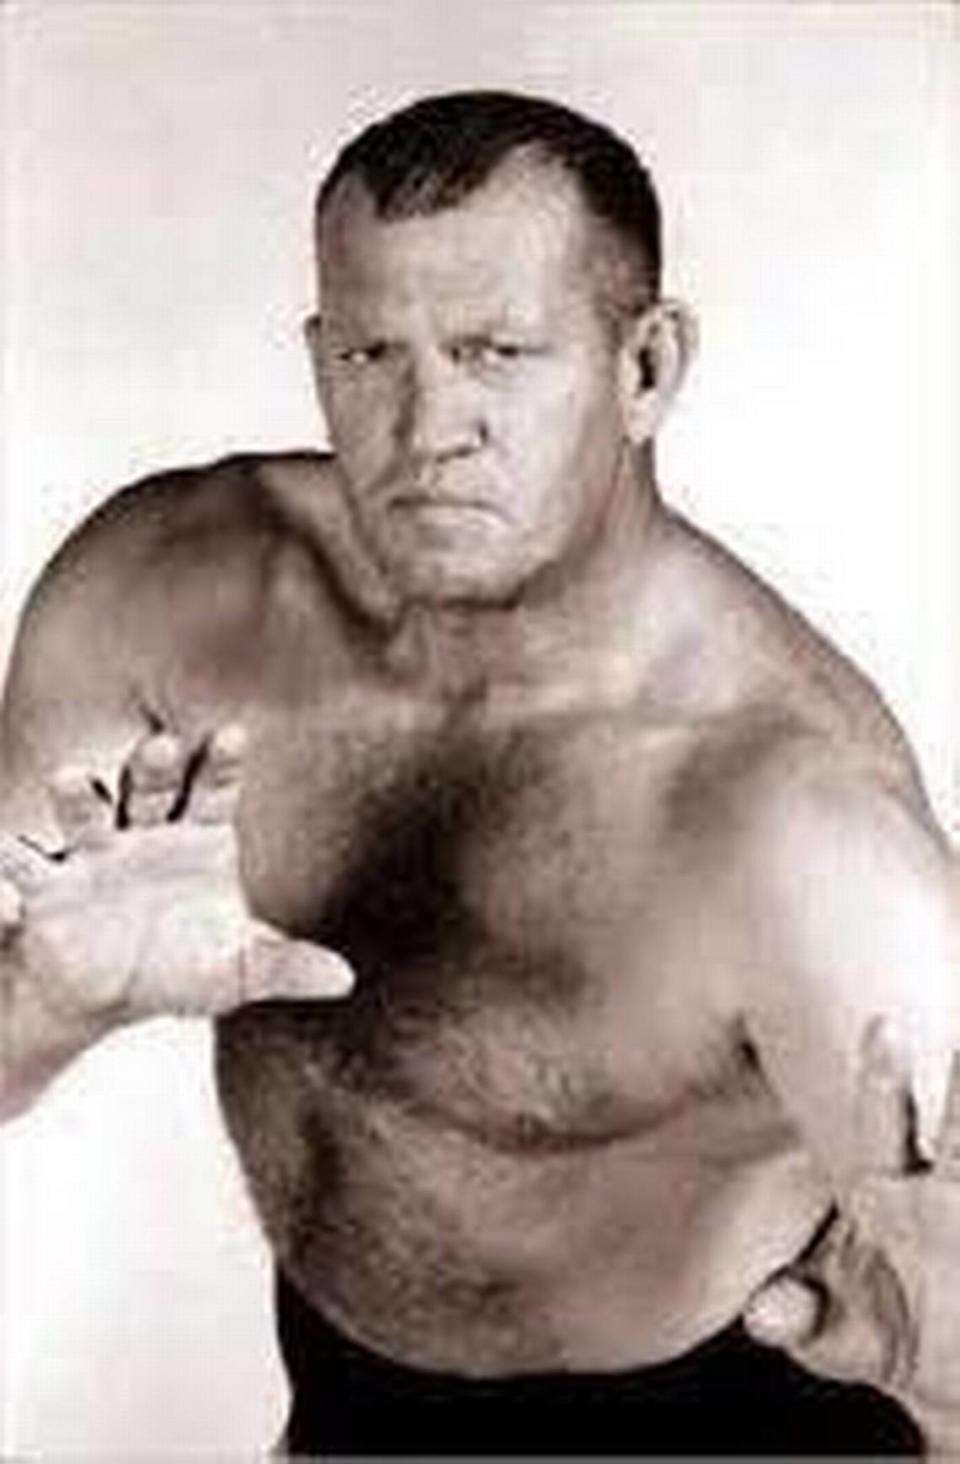 Fritz von Erich’s wrestling character was transformed from a “bad guy” to a “good guy in the 1960s.